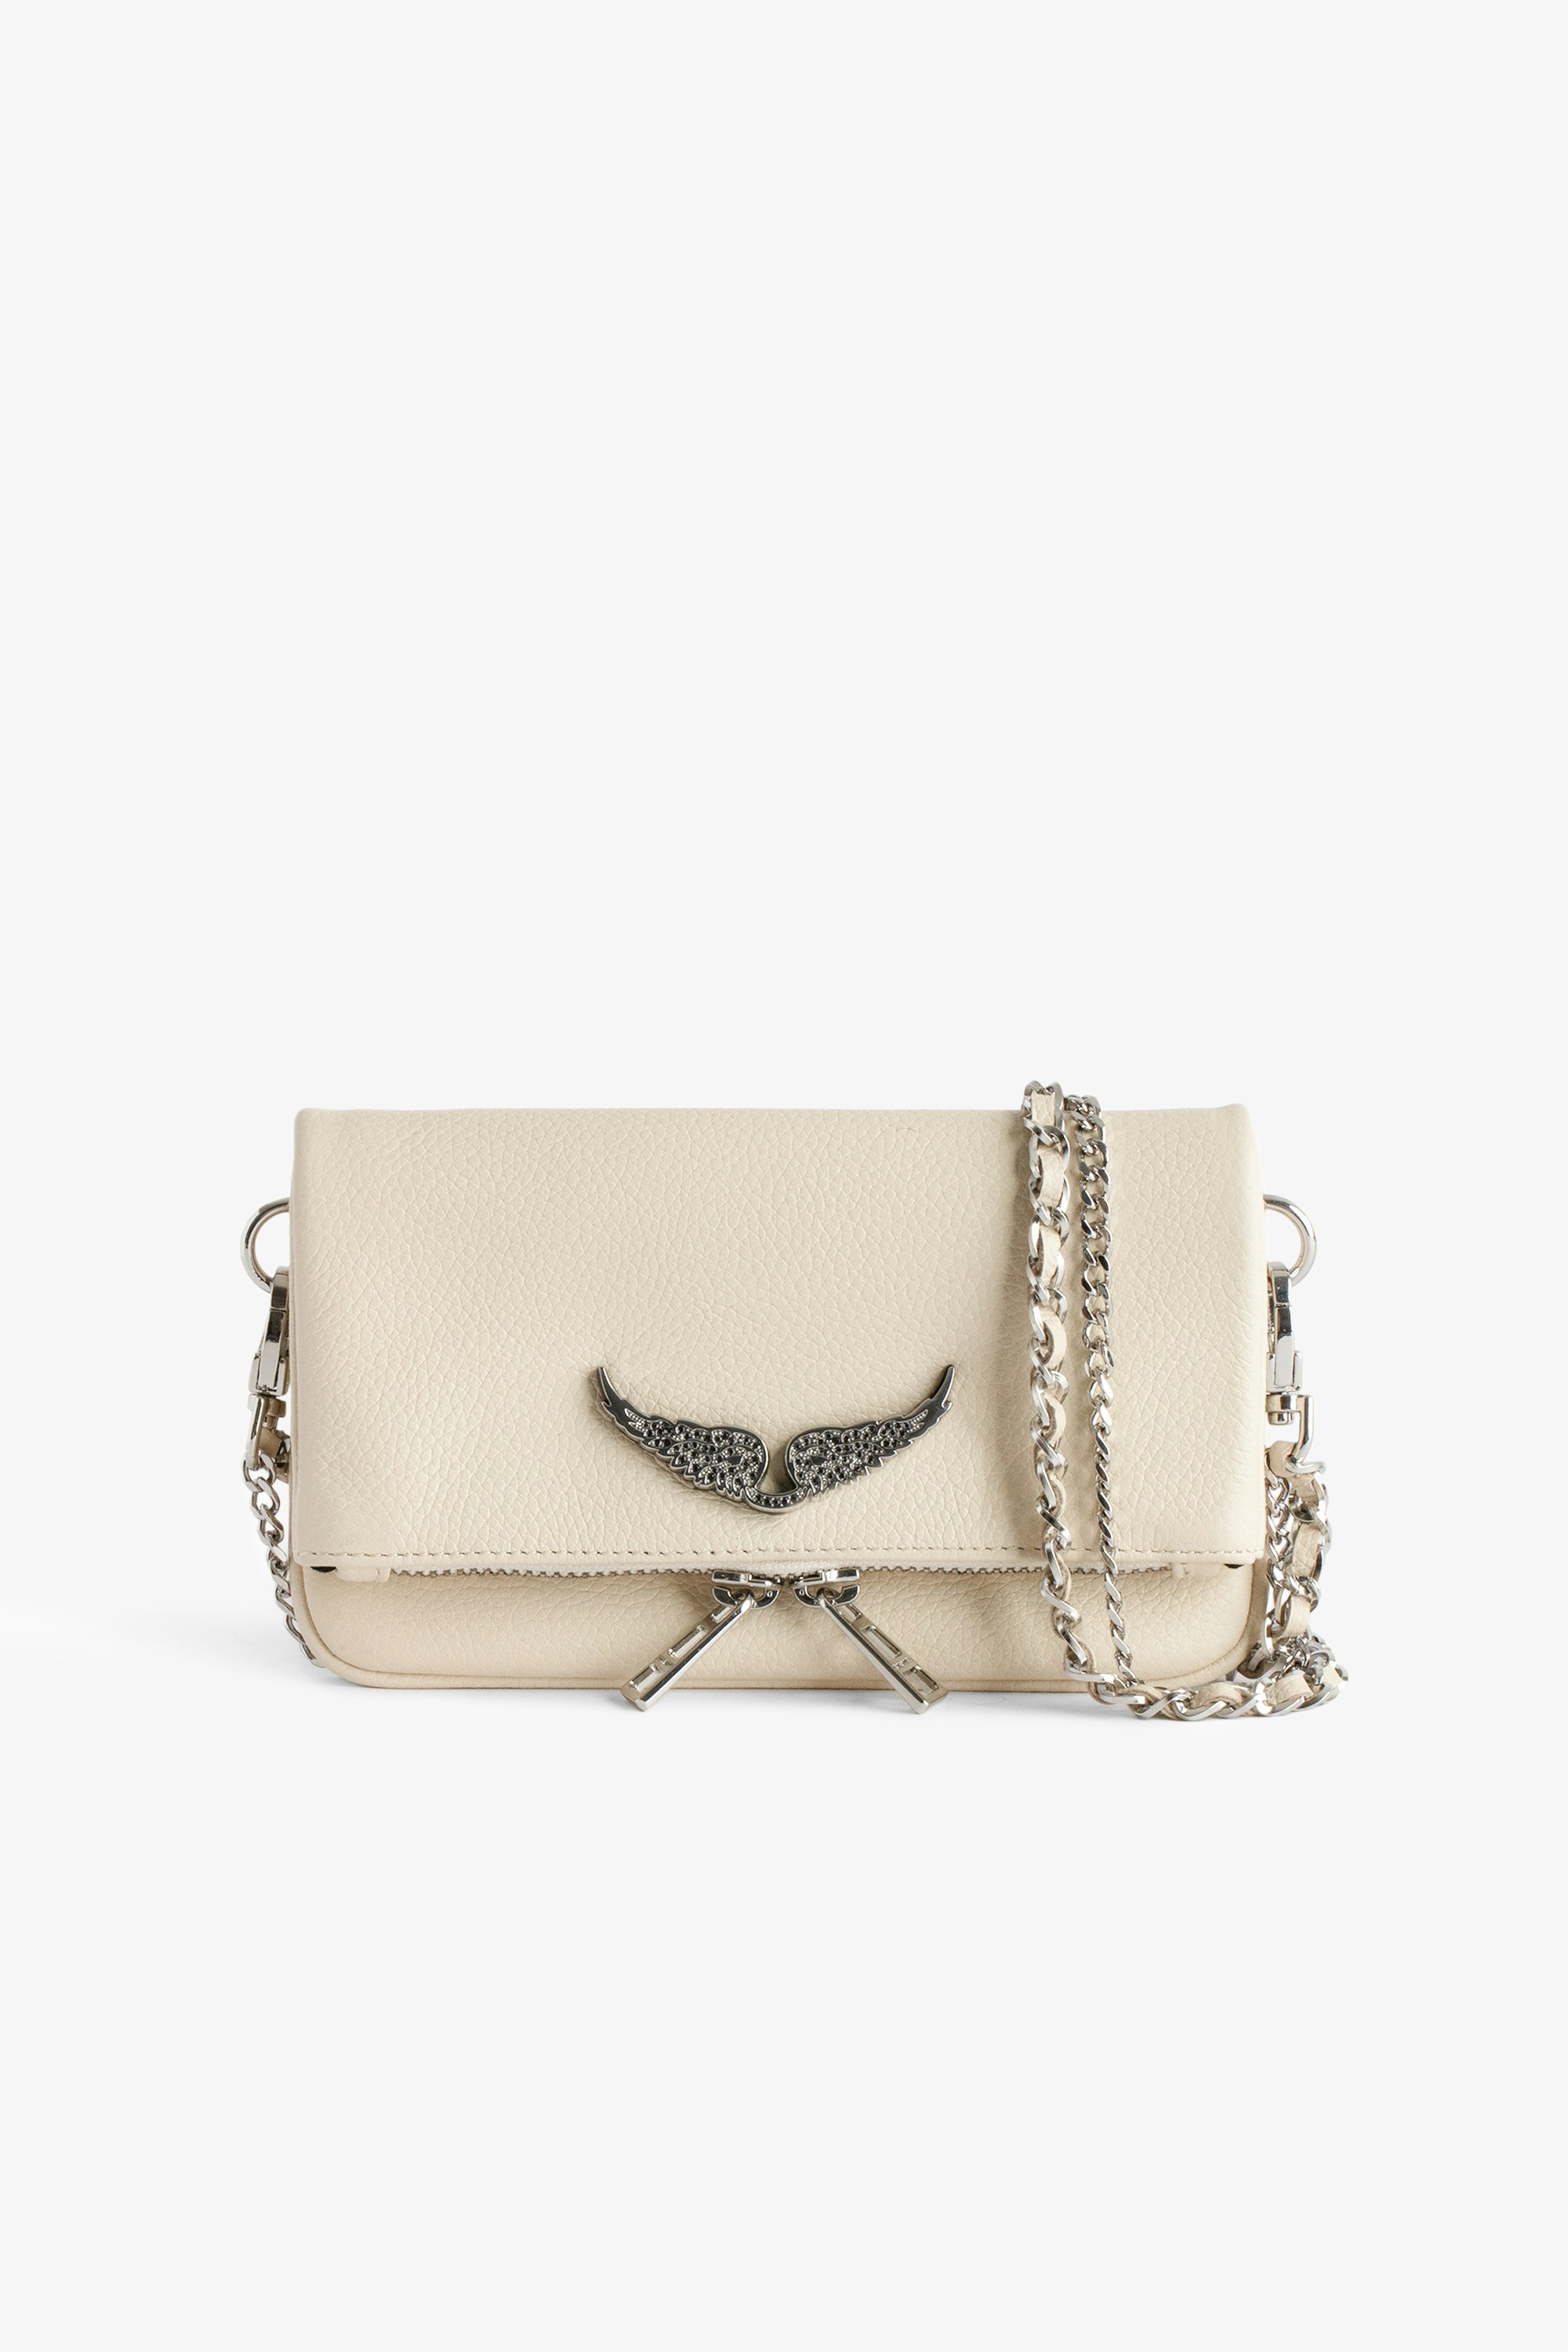 Swing Your Wings Rock Nano Clutch - Women’s white grained leather Swing Your Wings Rock Nano clutch with leather shoulder strap and chain